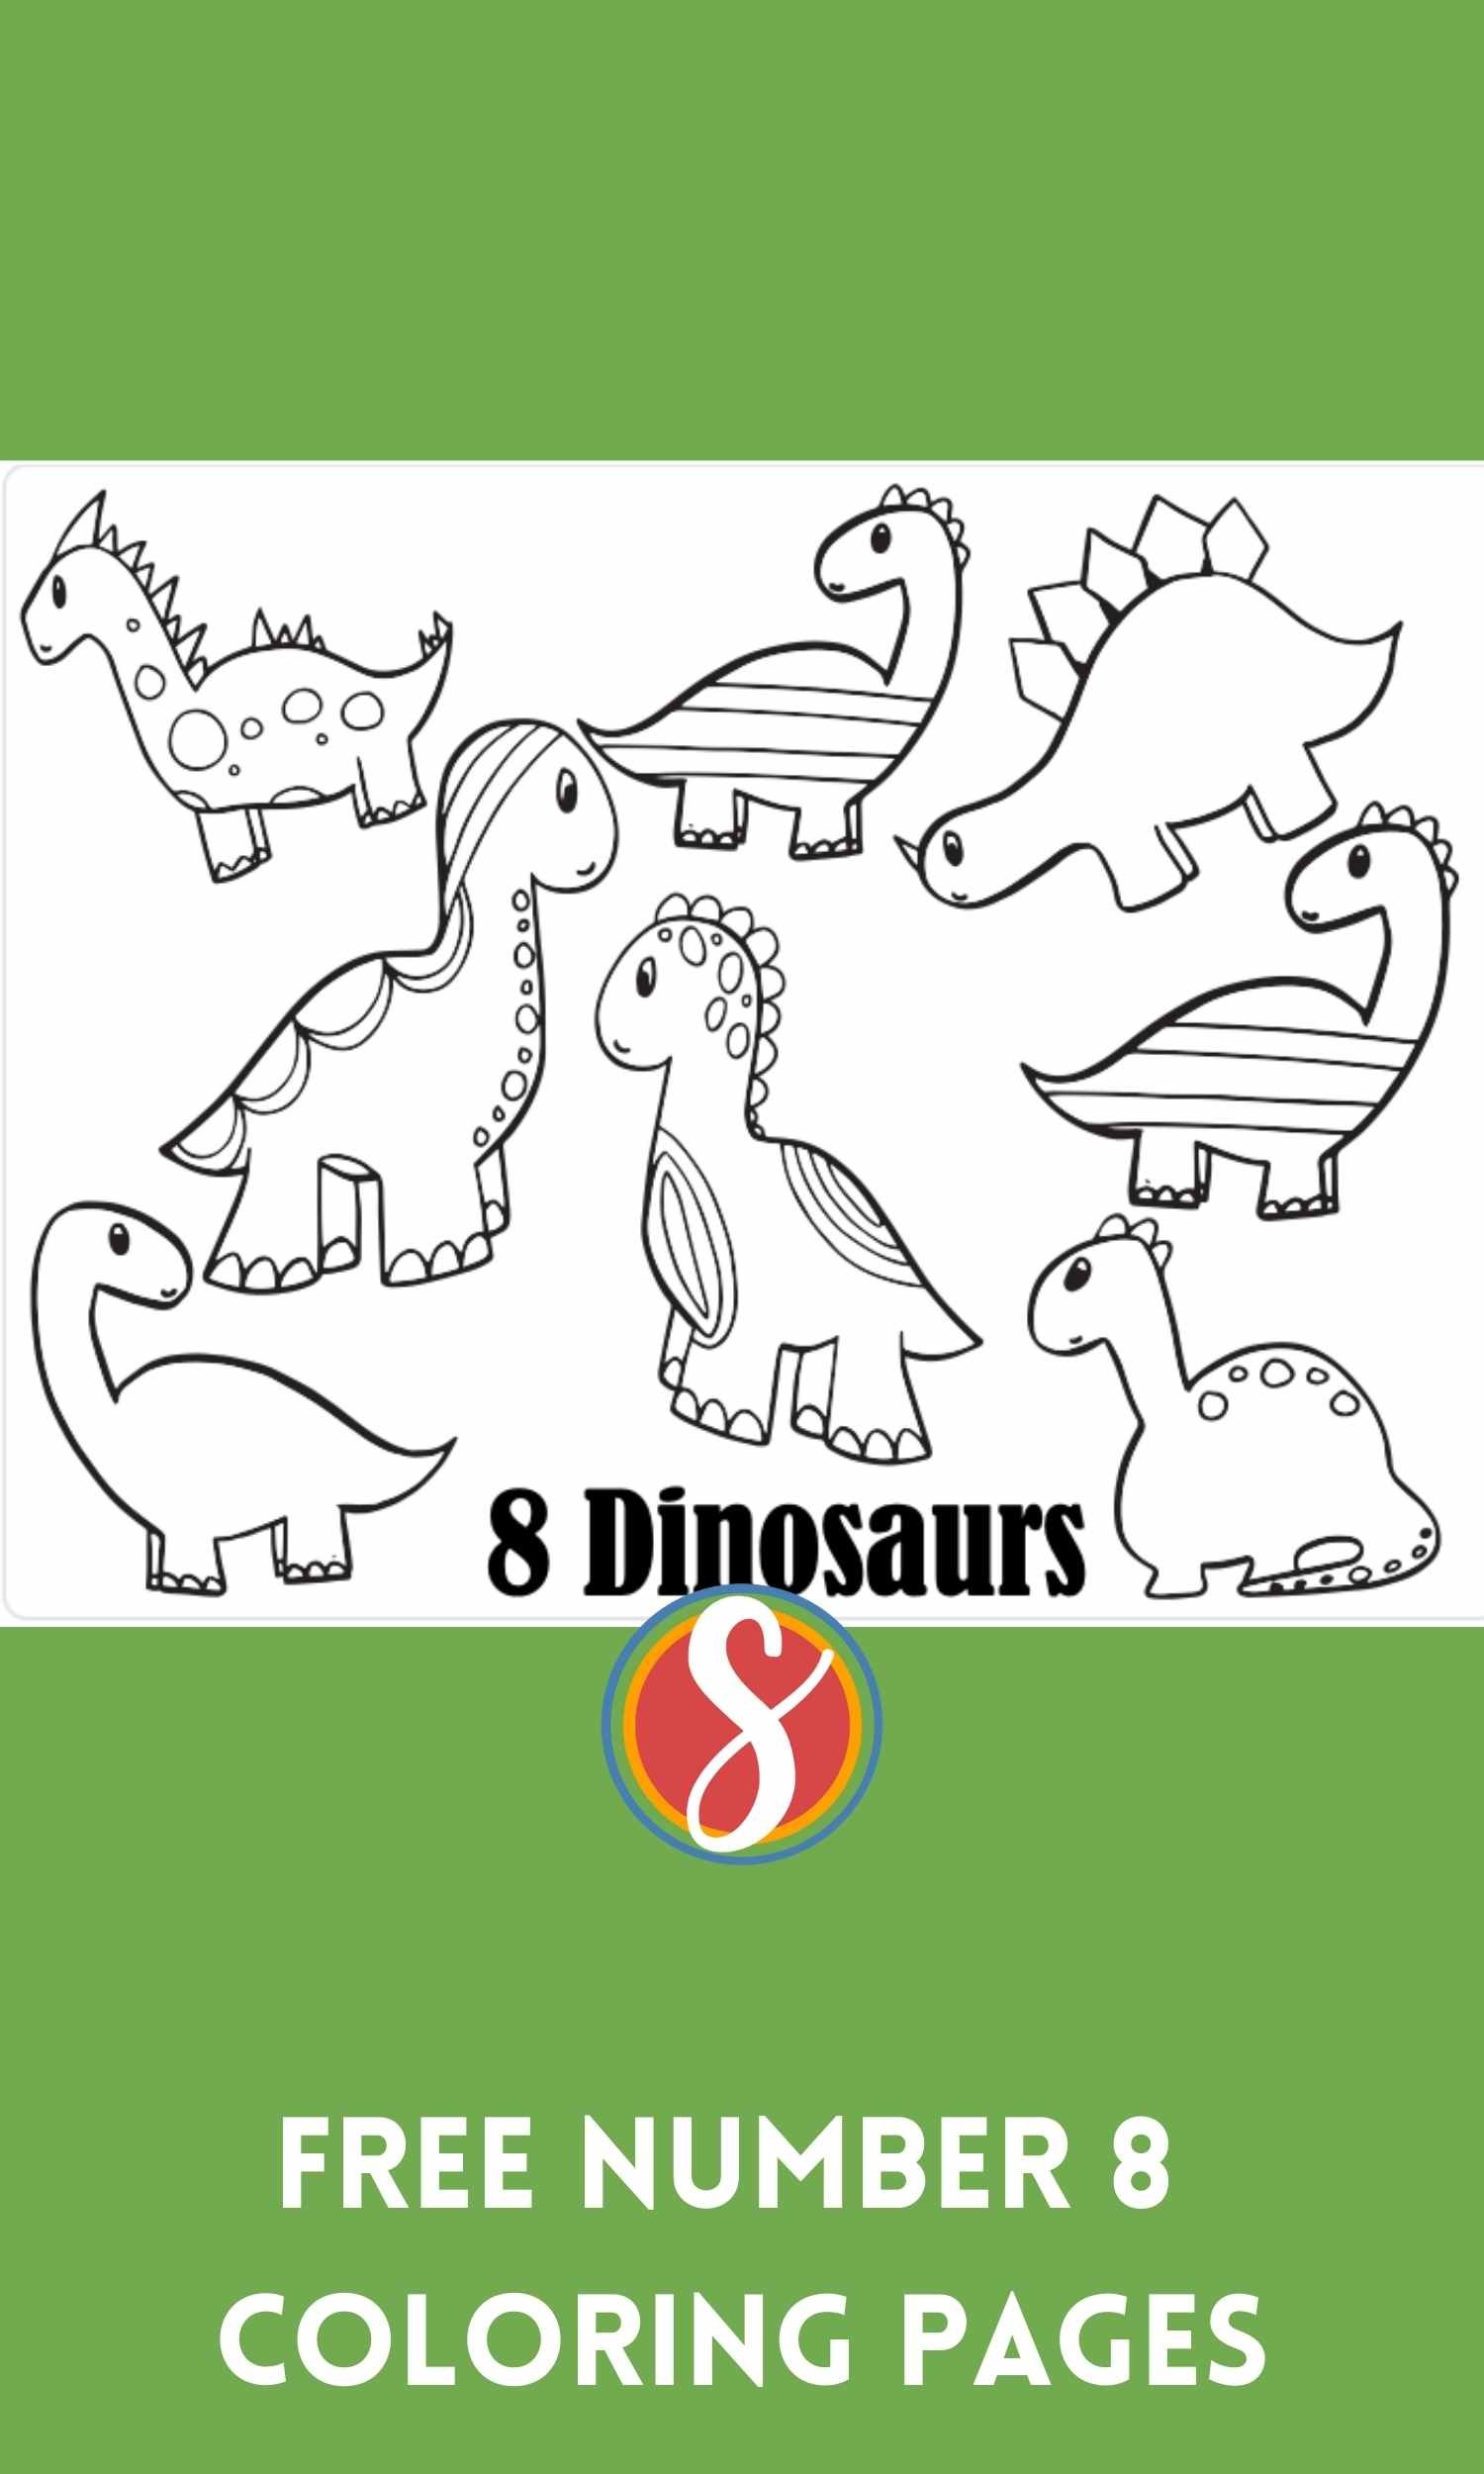 🖍️ FREE Printable, EASY Preschool Coloring Pages (over 1000 pages!)